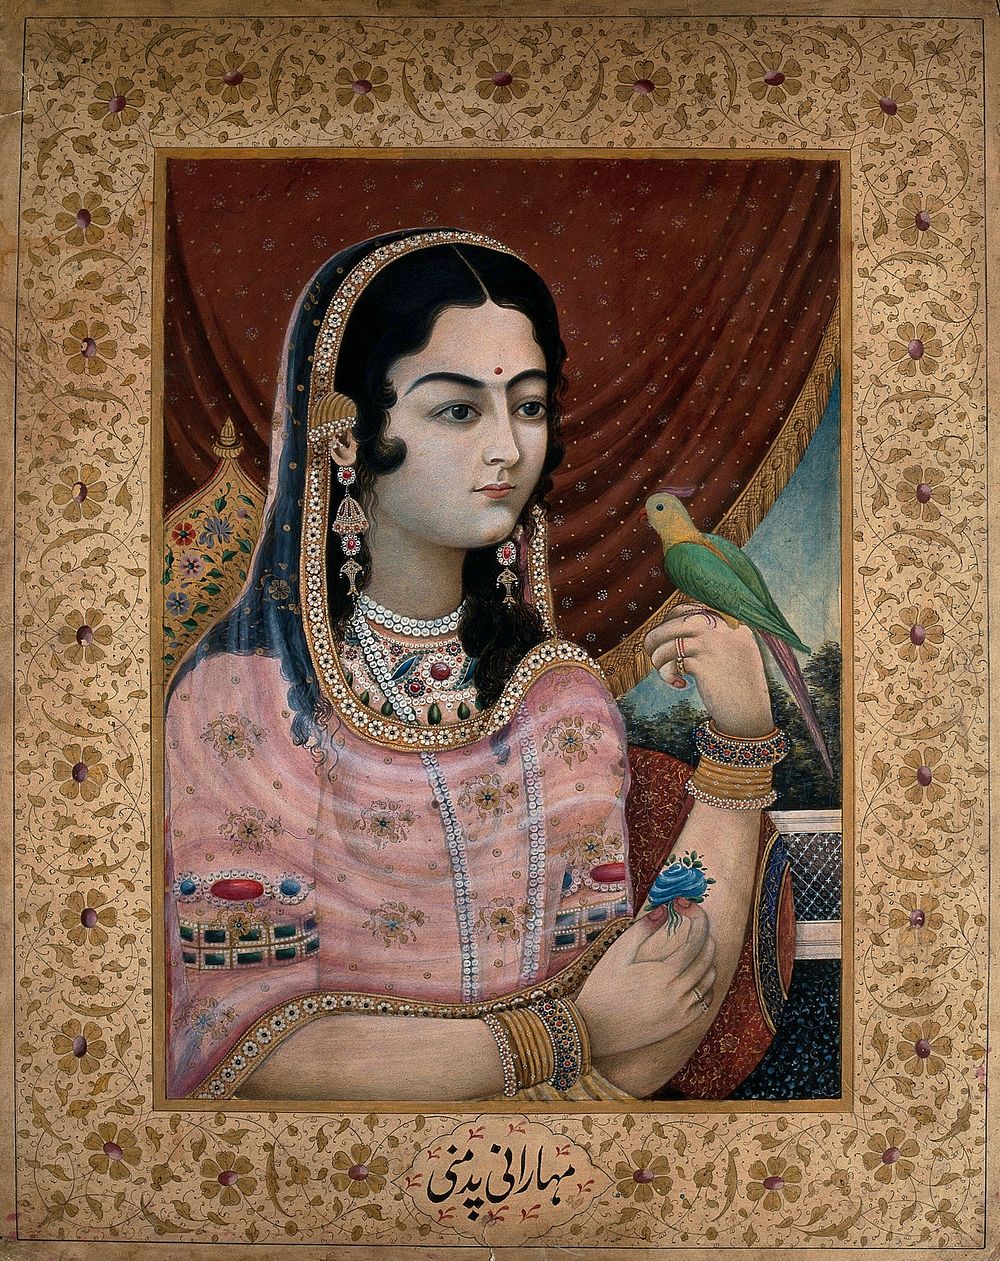 A Mughal courtesan or member of a Mughal royal family looking at a parrot perched on her hand. Gouache painting by an Indian…